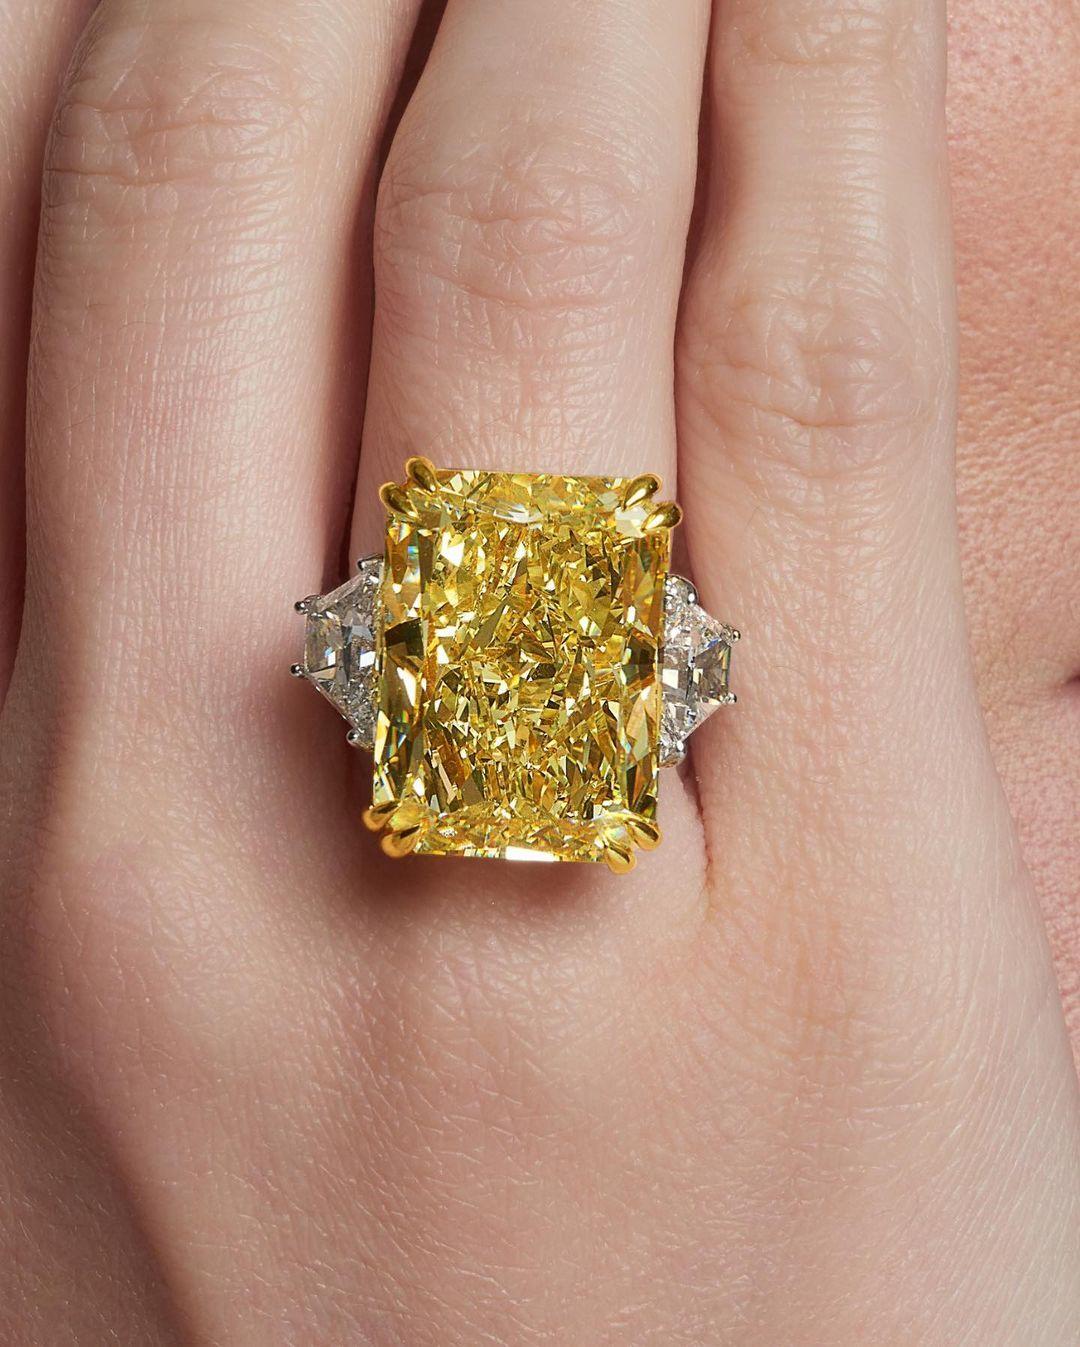 This stunning engagement ring boasts a magnificent centerpiece: a GIA certified 15.80 carat fancy yellow diamond solitaire. The diamond's fancy yellow color grade radiates a captivating and vibrant hue, imbuing the ring with a sense of unparalleled